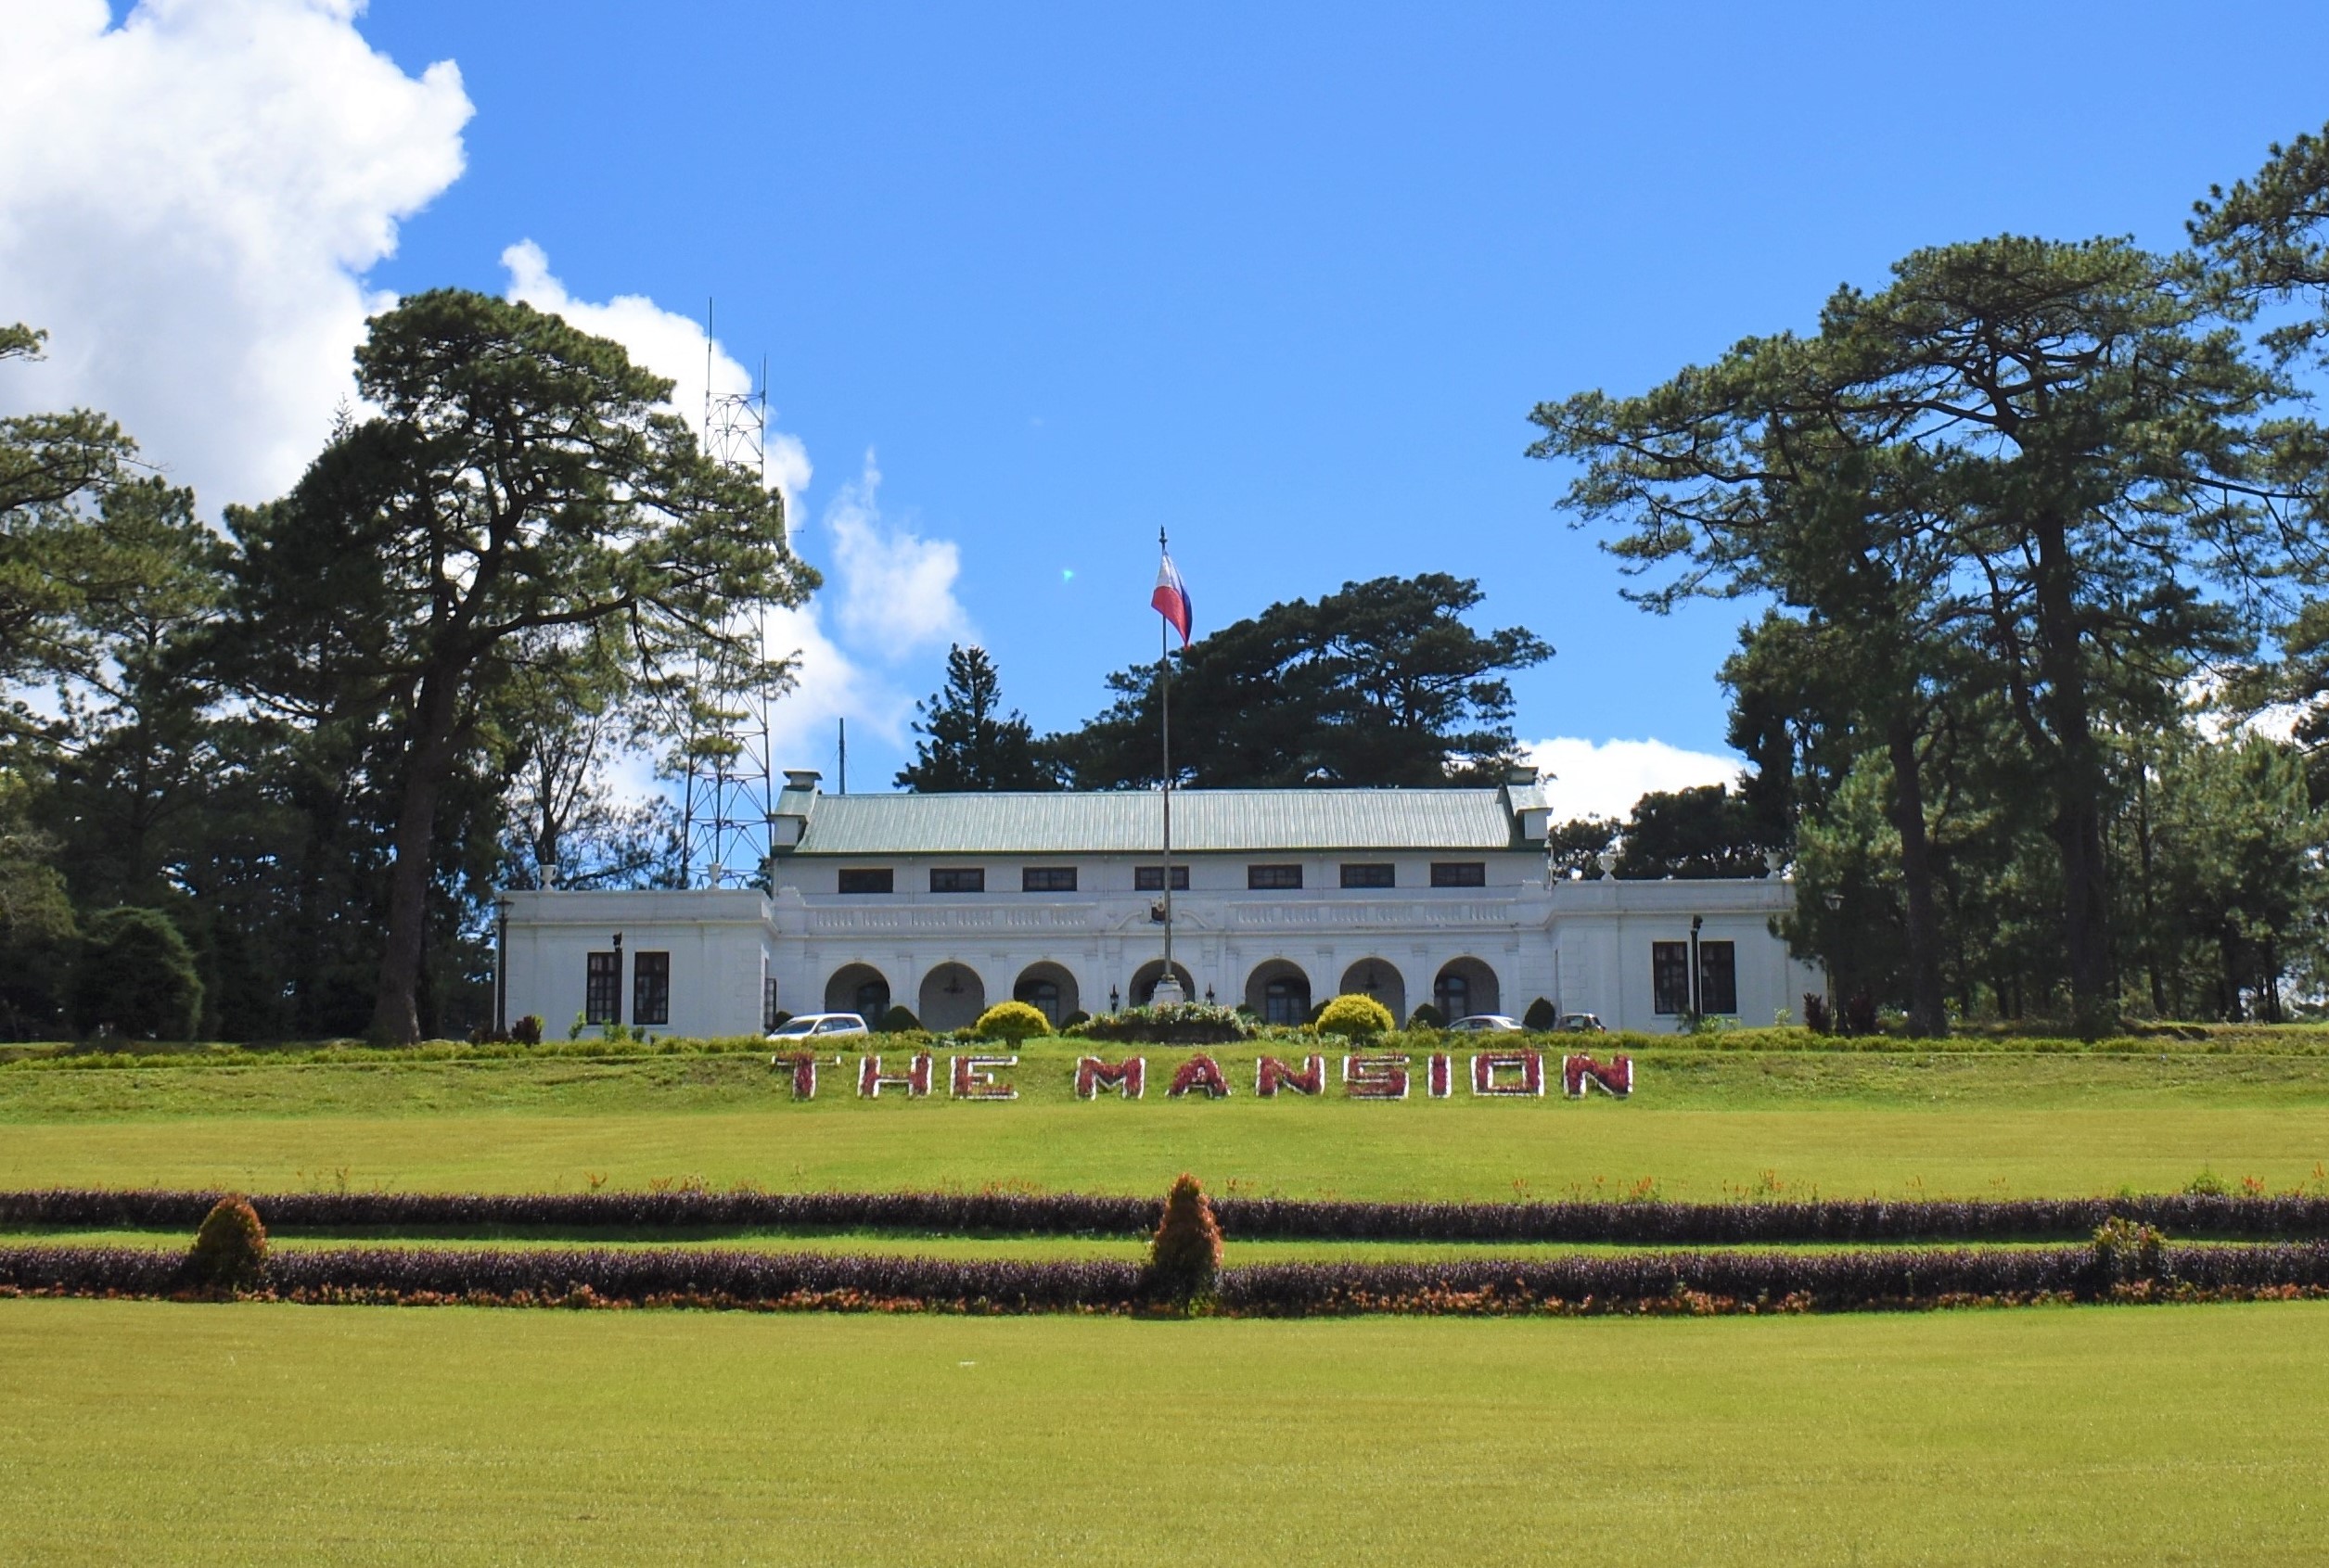 The Mansion (Baguio) - Wikipedia